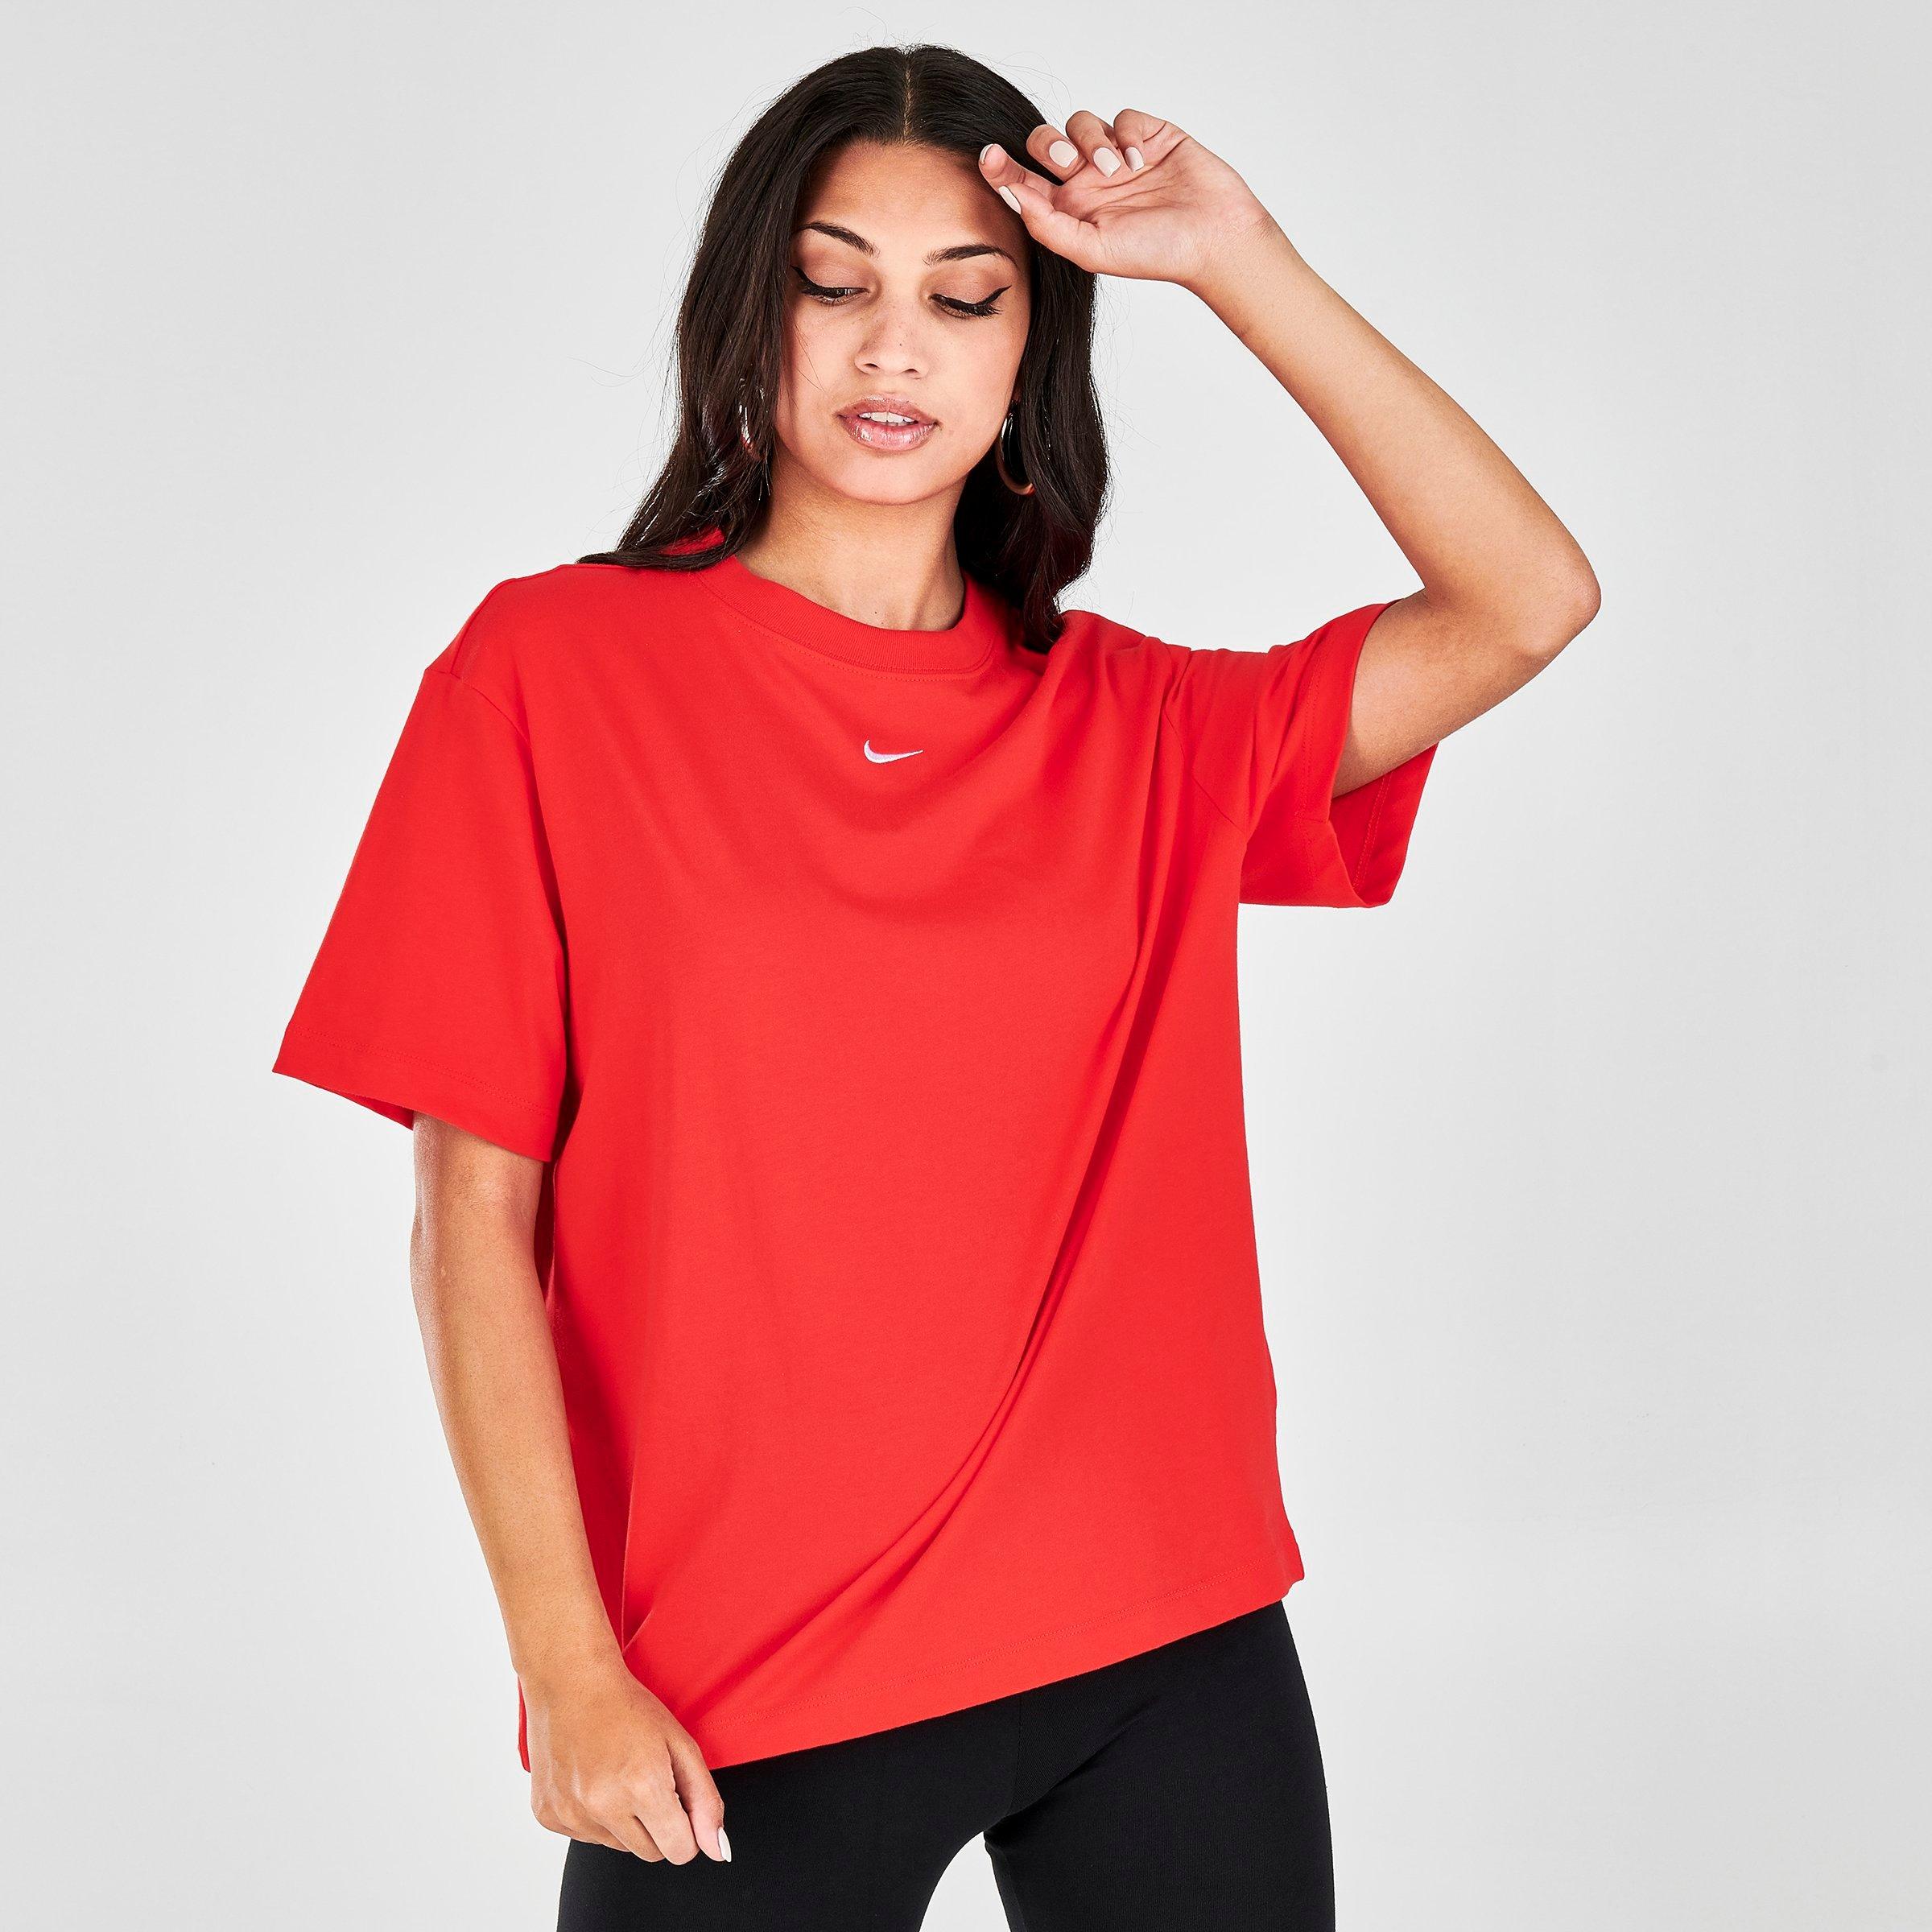 chile red nike shirt